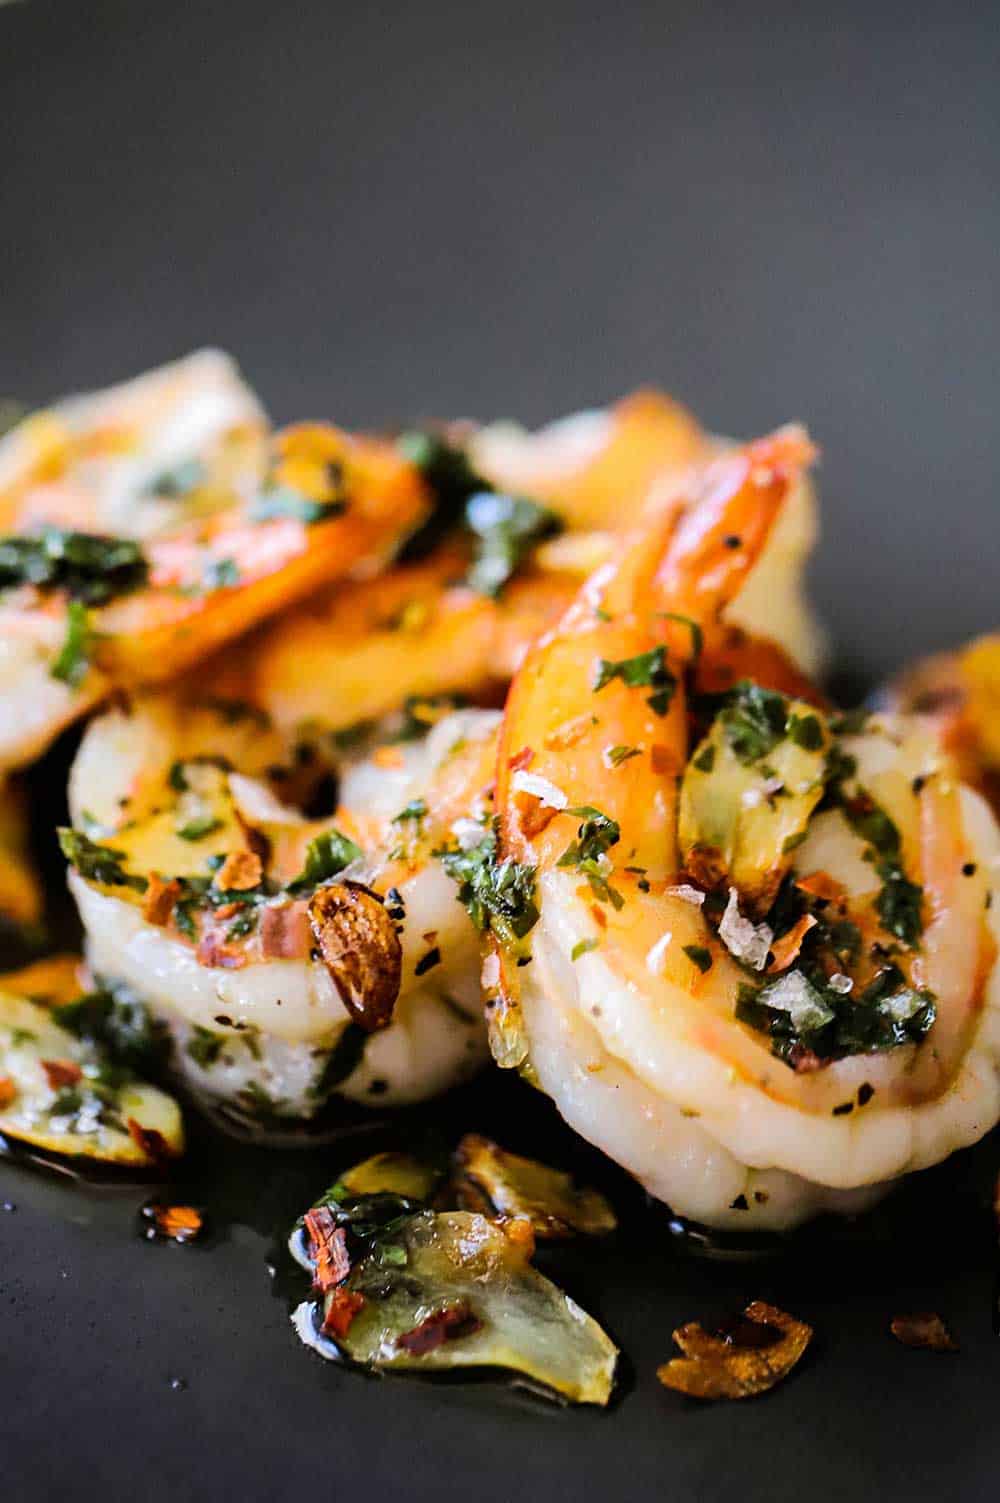 A small dark grey appetizer plate filled with 4 cooked shrimps topped with fried garlic slivers and a white wine and parsley sauce. 